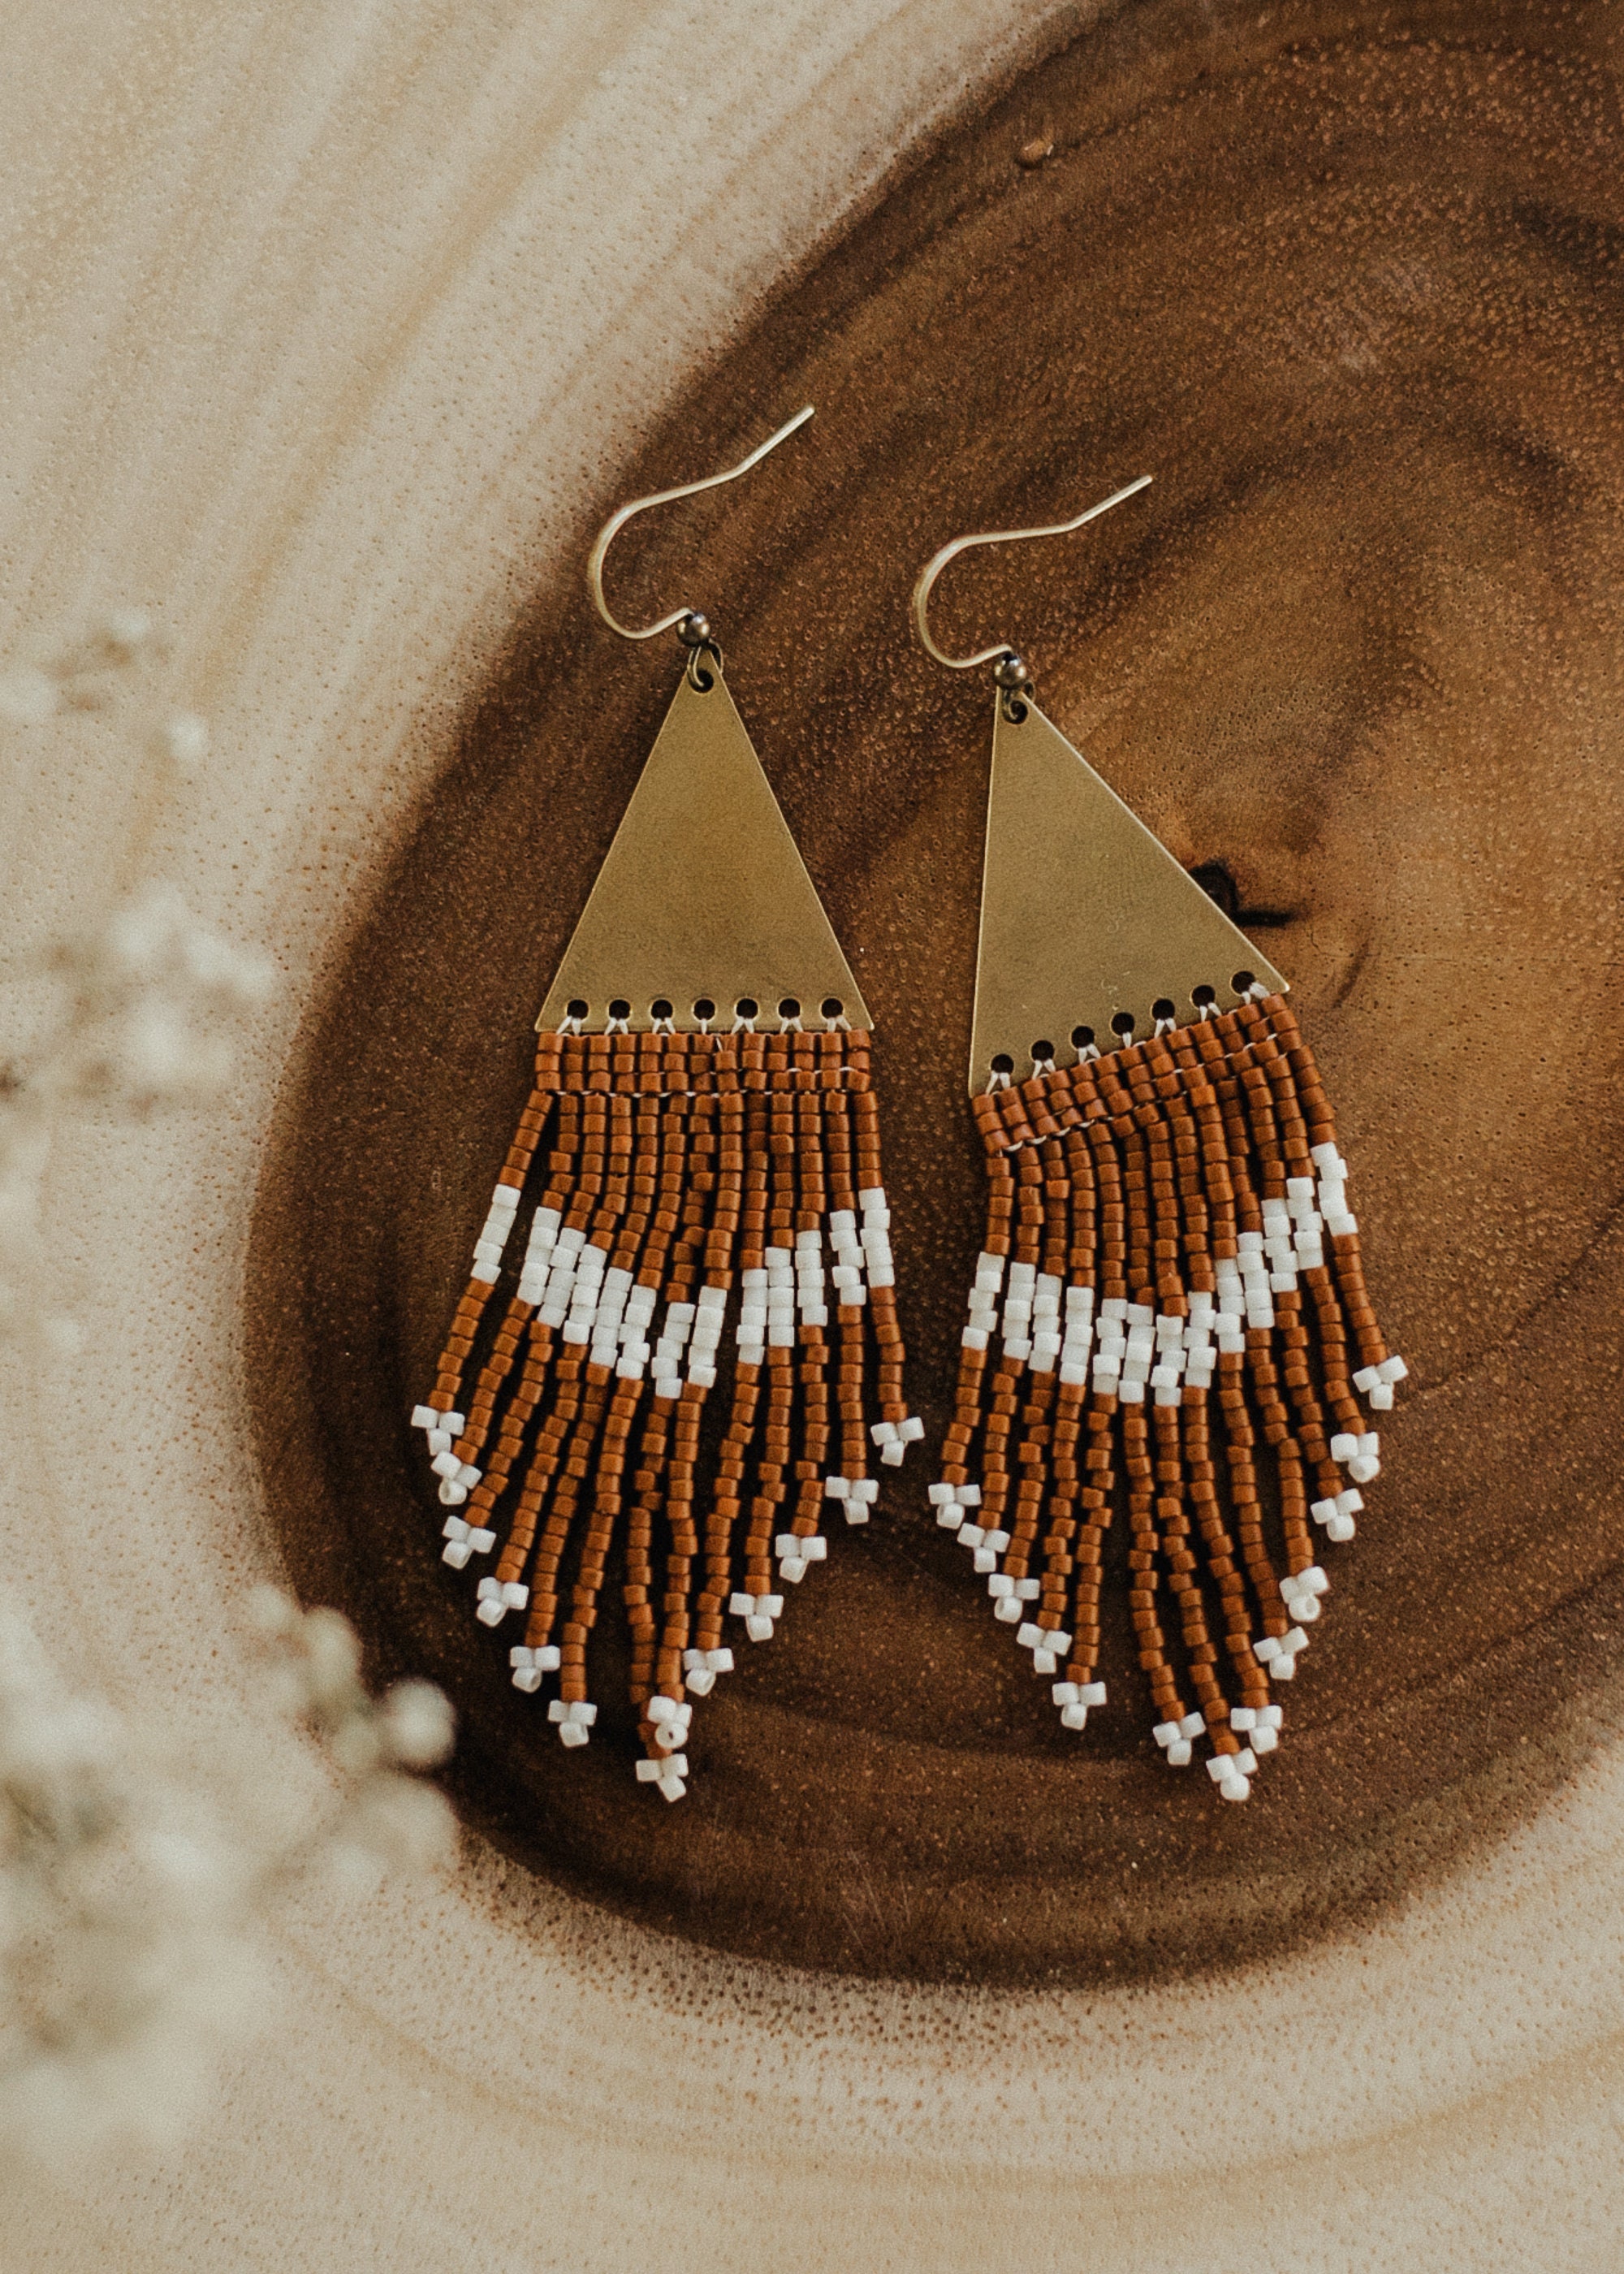 Liv / Rust / Nature Inspired Seed Beaded Earrings / Native - Etsy